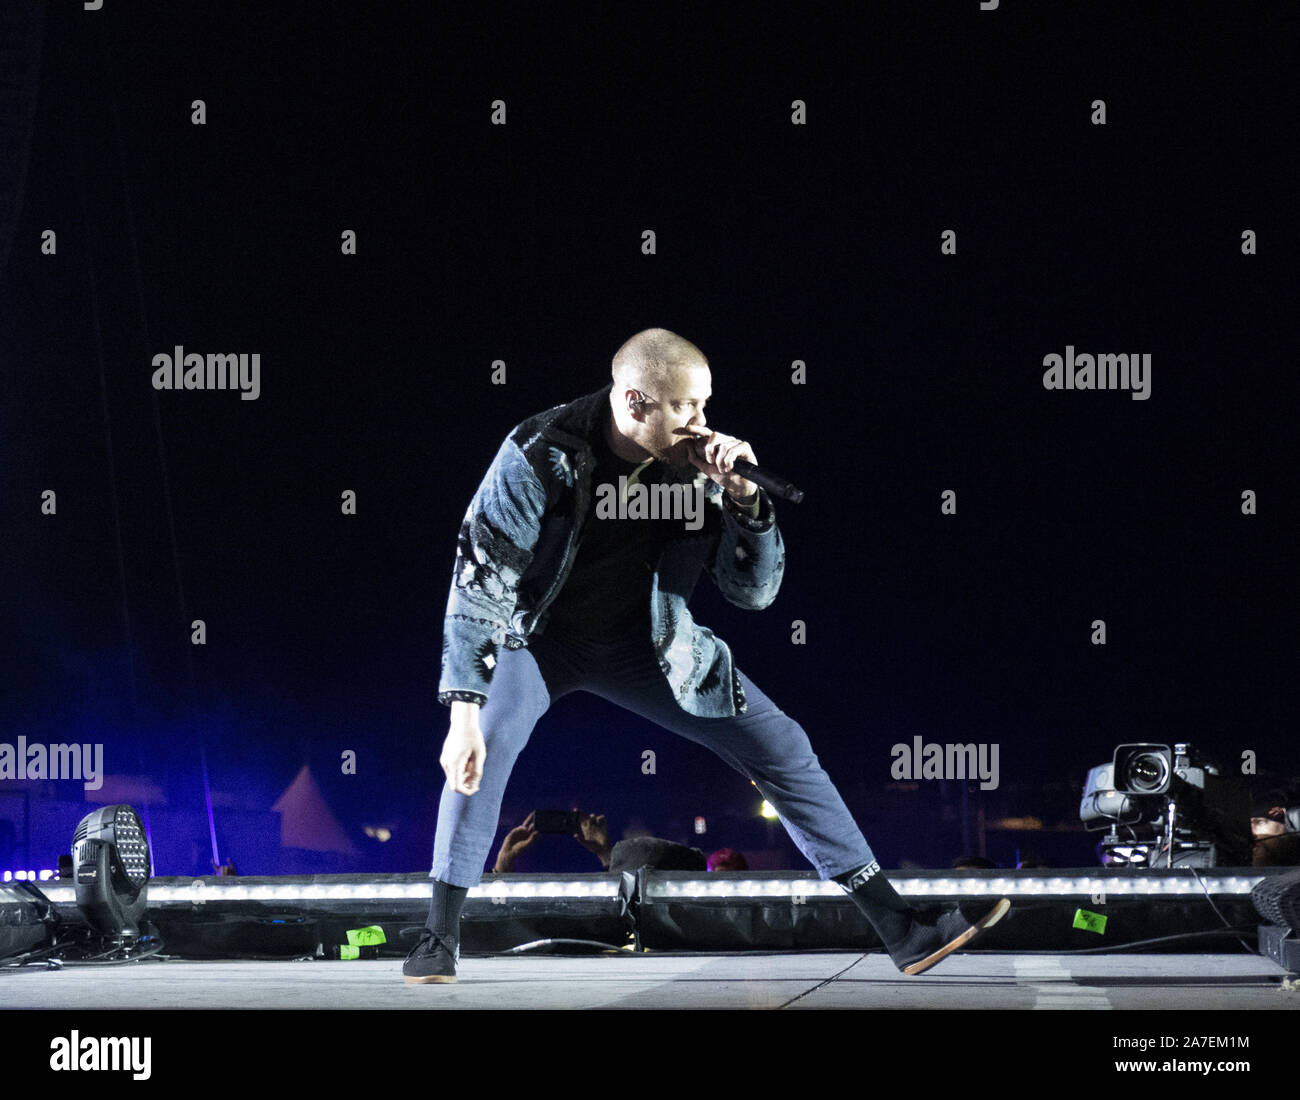 November 1, 2019, Austin, Texas, U.S: IMAGINE DRAGONS Outdoor Concert at the Germania Insurance Super Stage at the Circuit of the Americas, Lead Singer DAN REYNOLDS. (Credit Image: © Hoss McBain/ZUMA Wire) Stock Photo